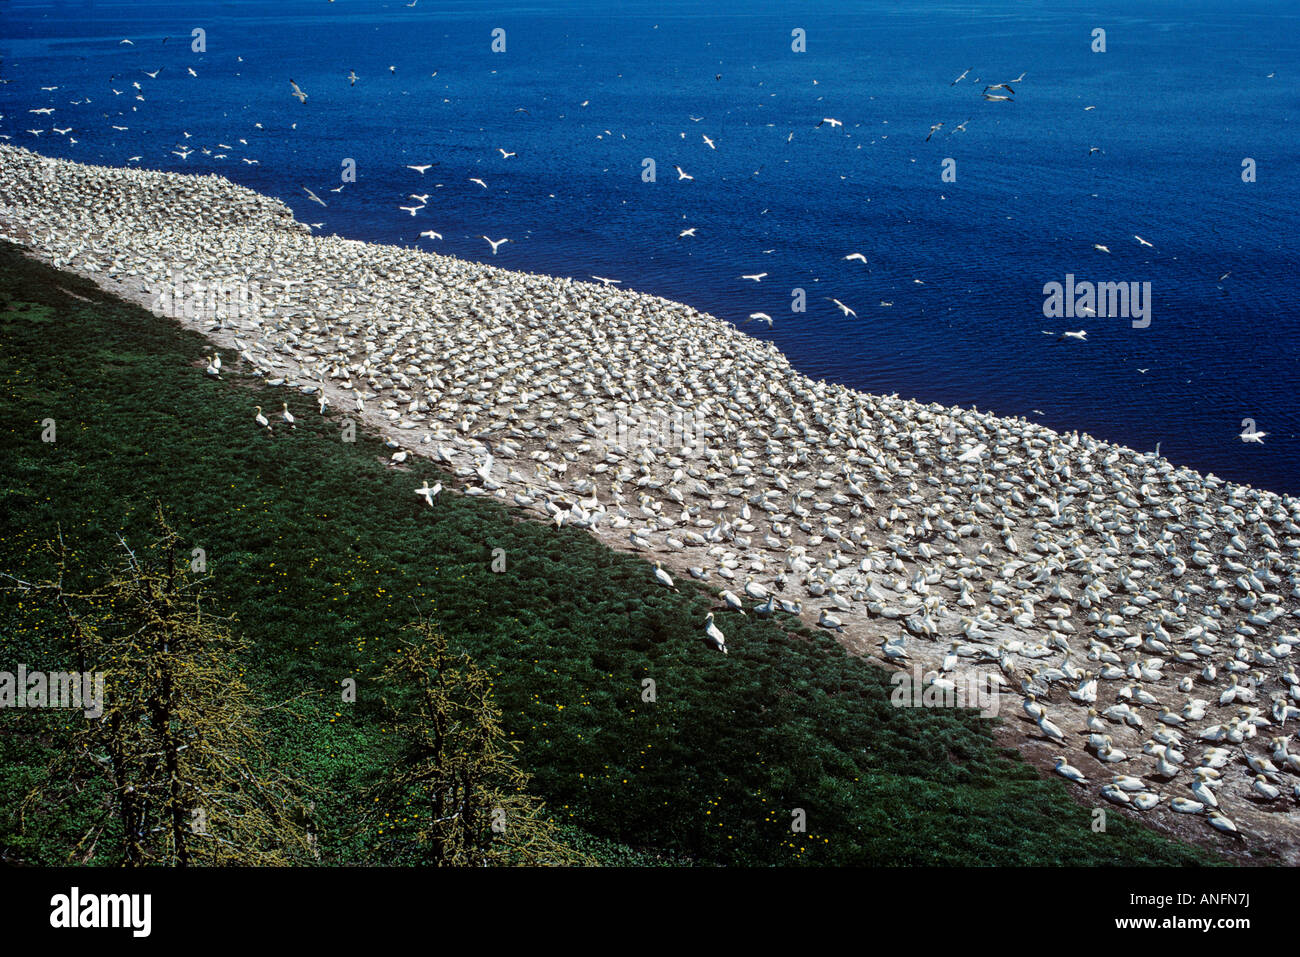 Northern Gannet Colony, Bonaventure Island ecological reserve, Gaspe Bay, Quebec, Canada. Stock Photo